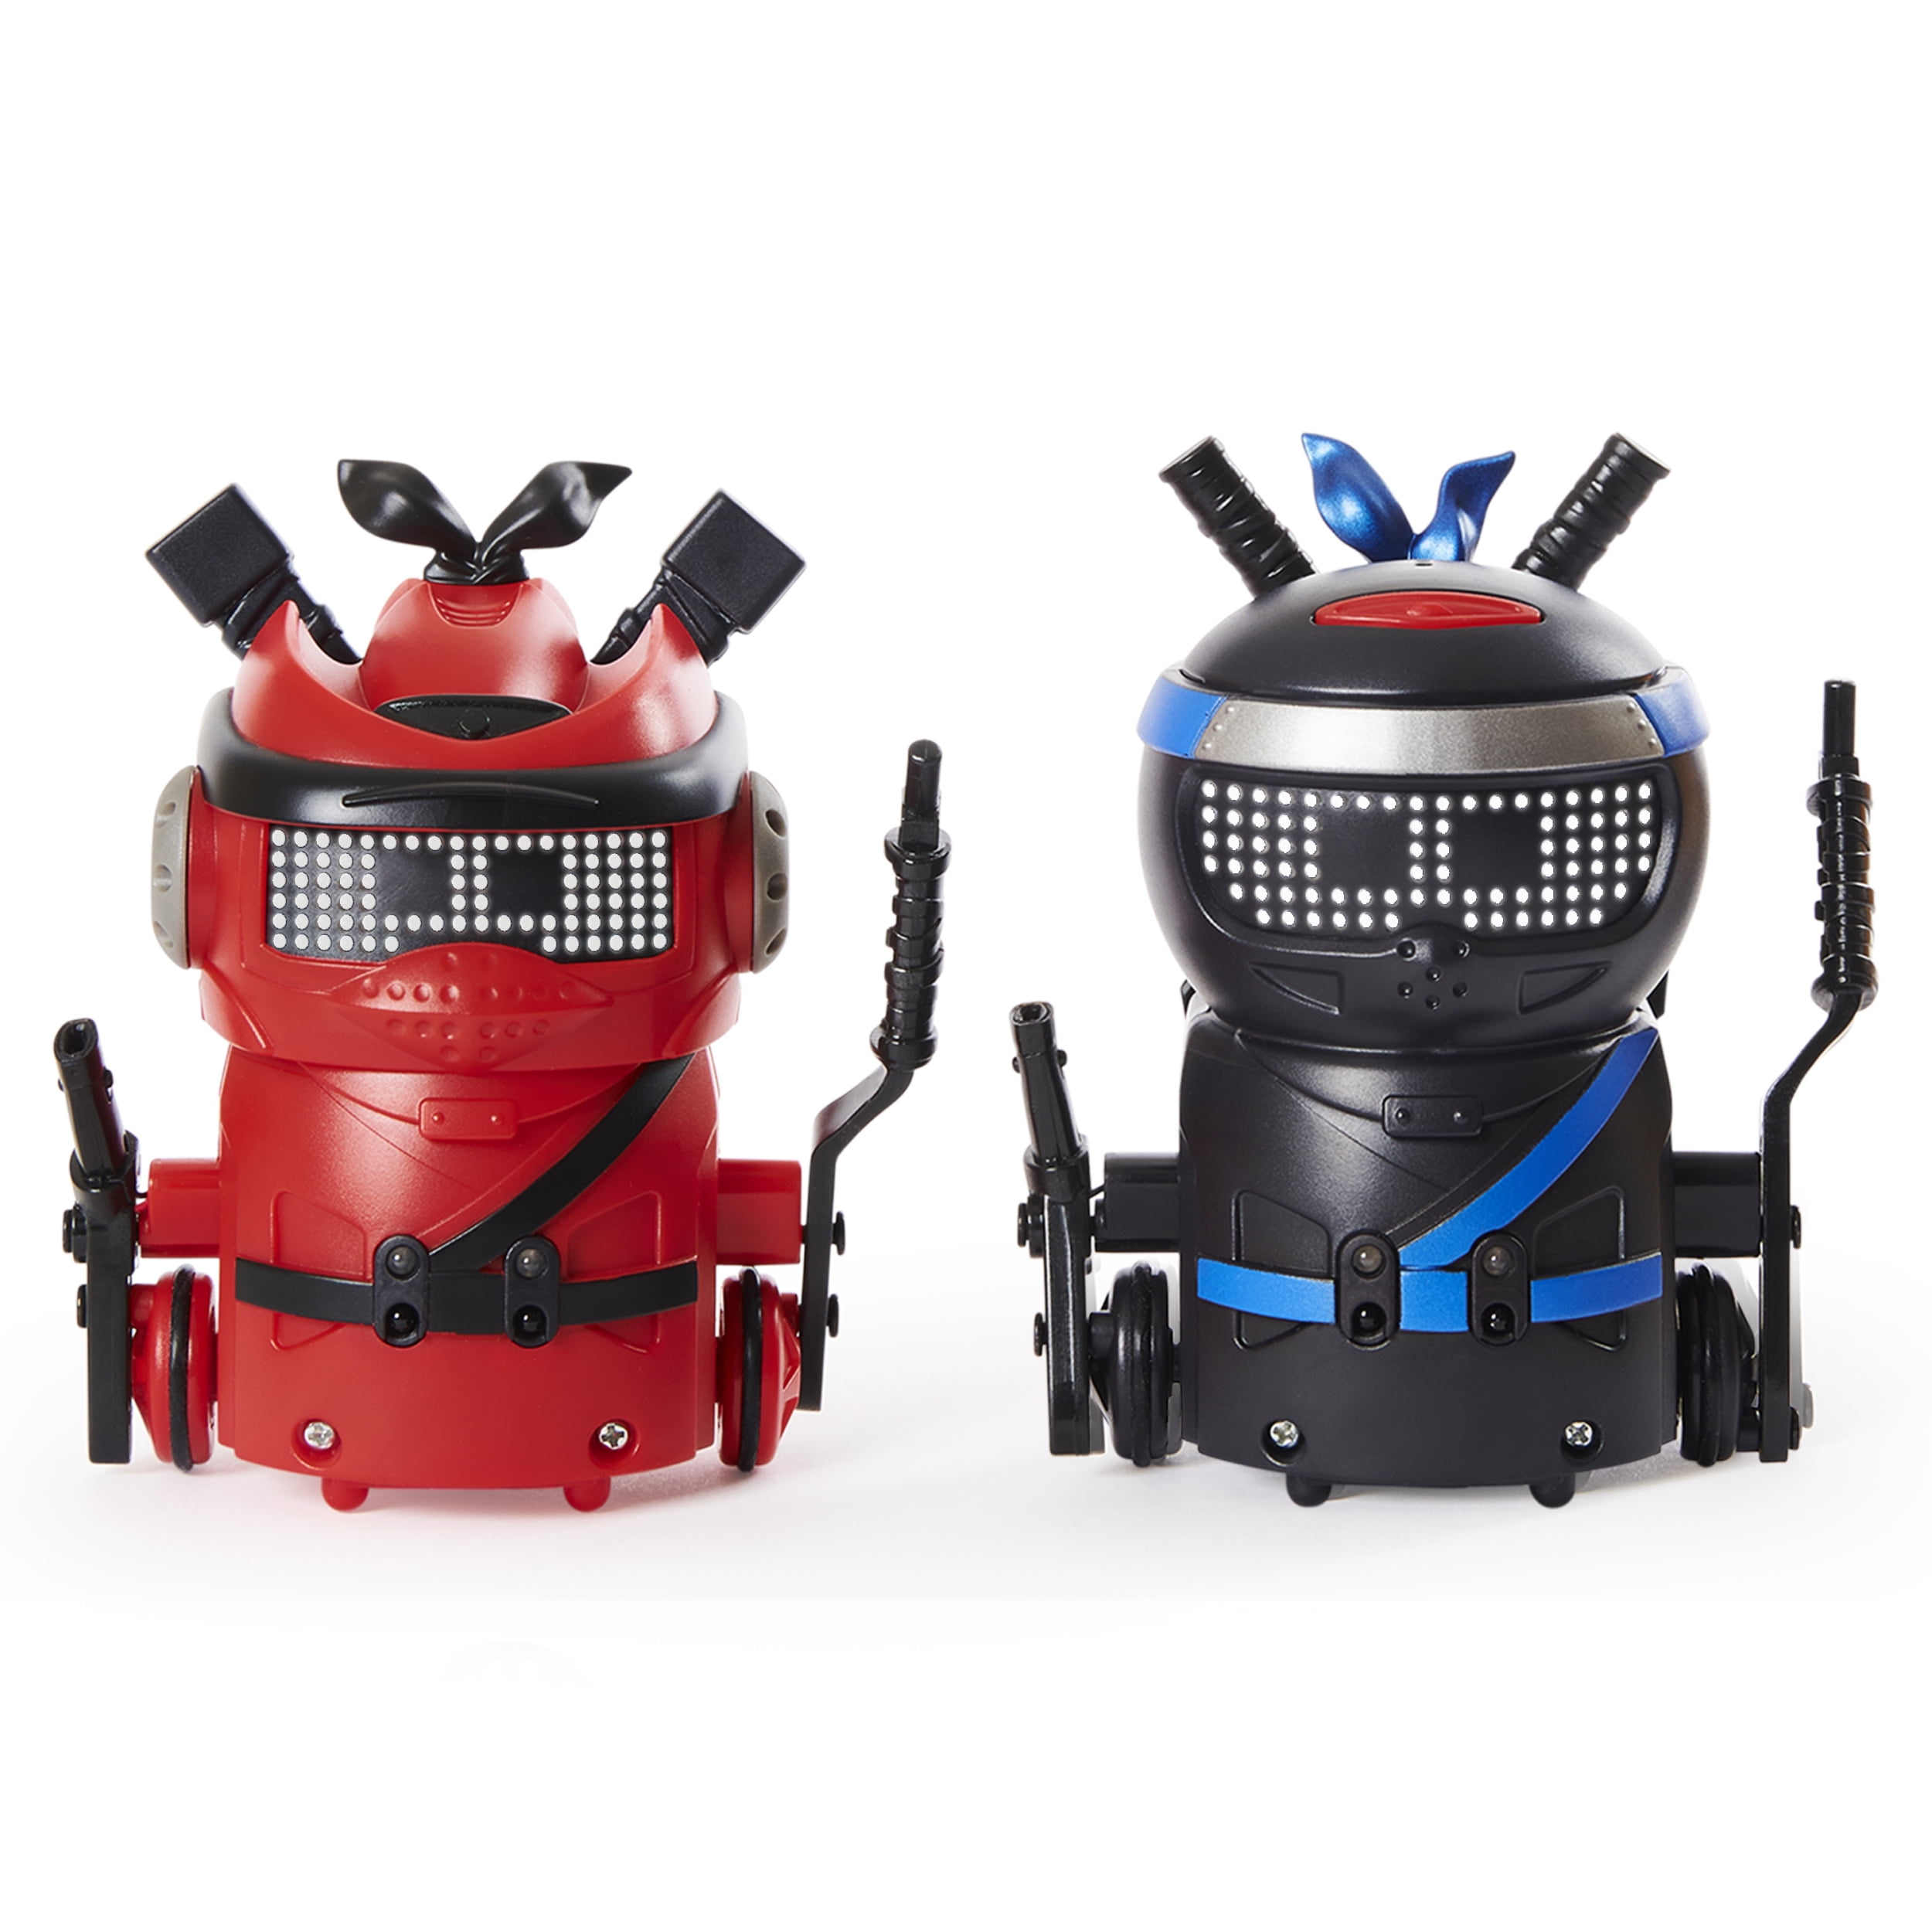 Ninja Bots 2-Pack Hilarious Battling Robots Red Black with 6 Fight Accessories 